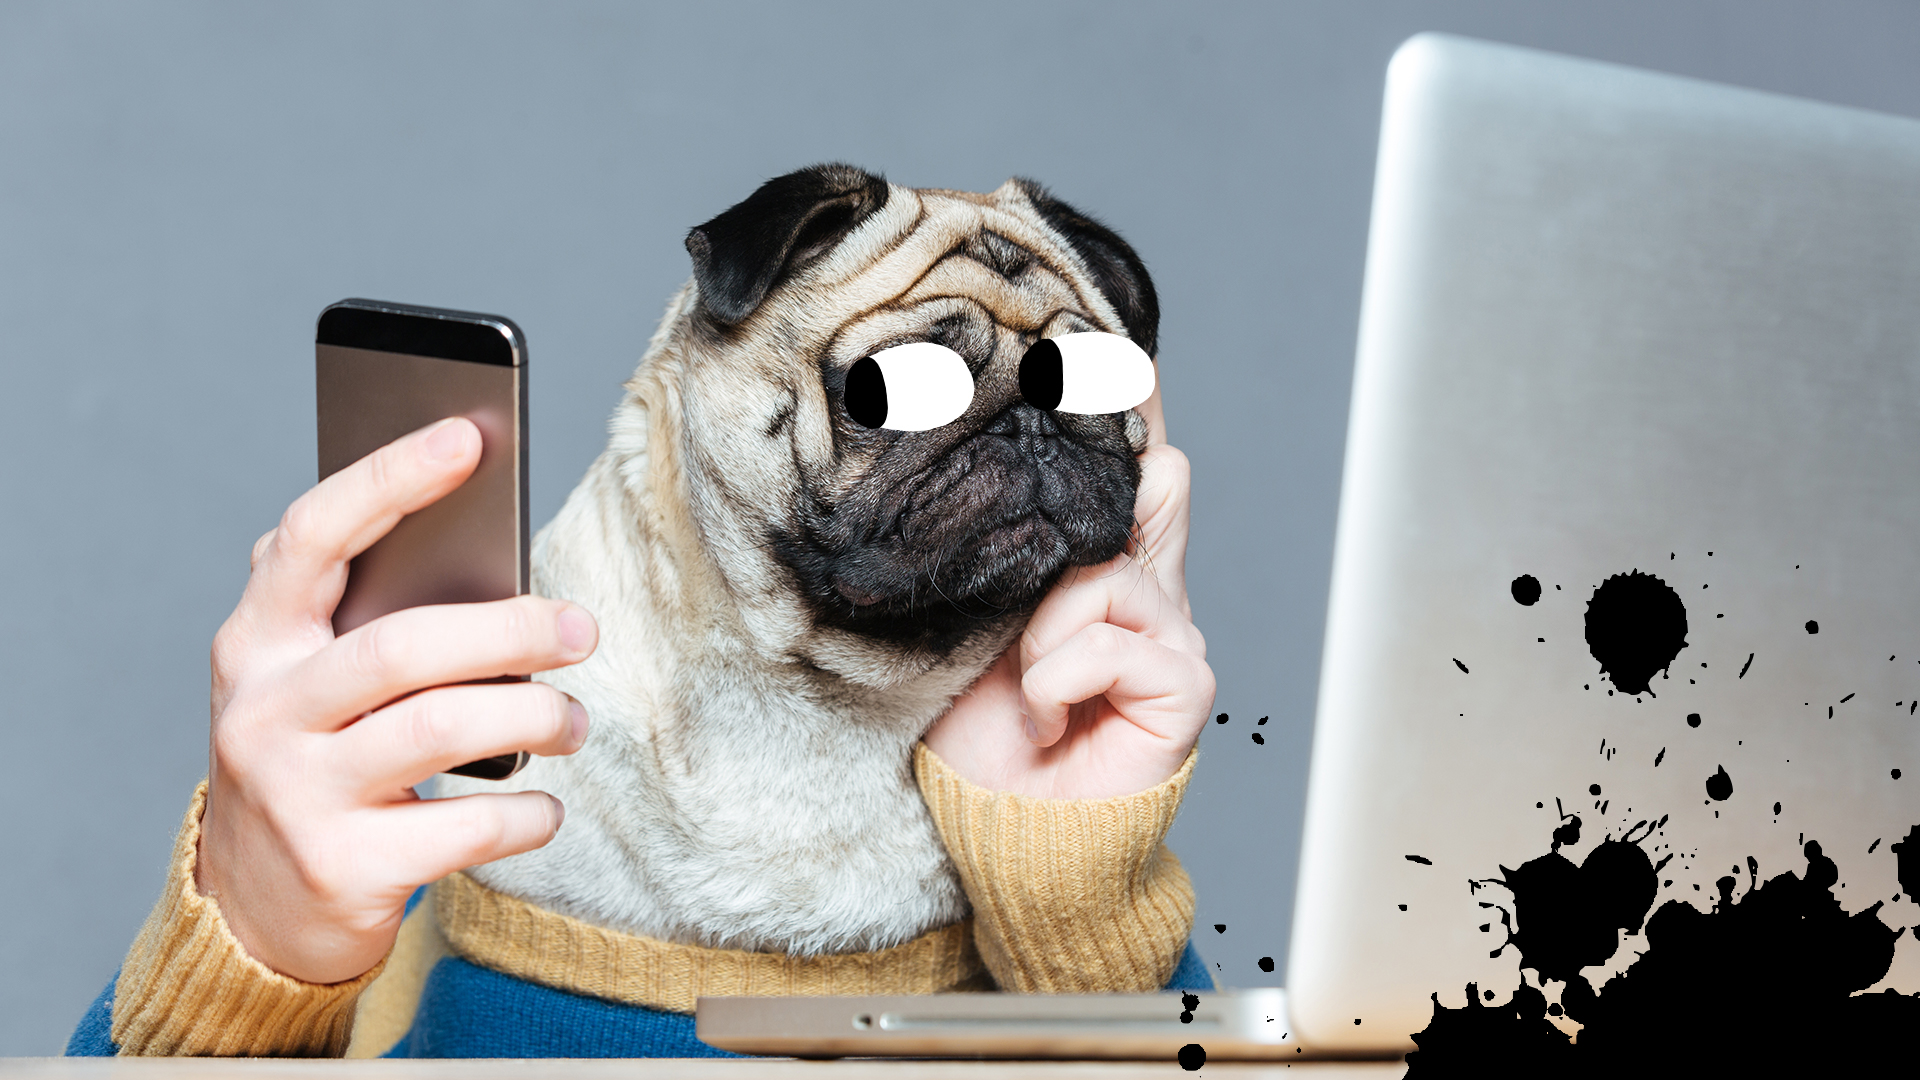 A pug looks at her phone